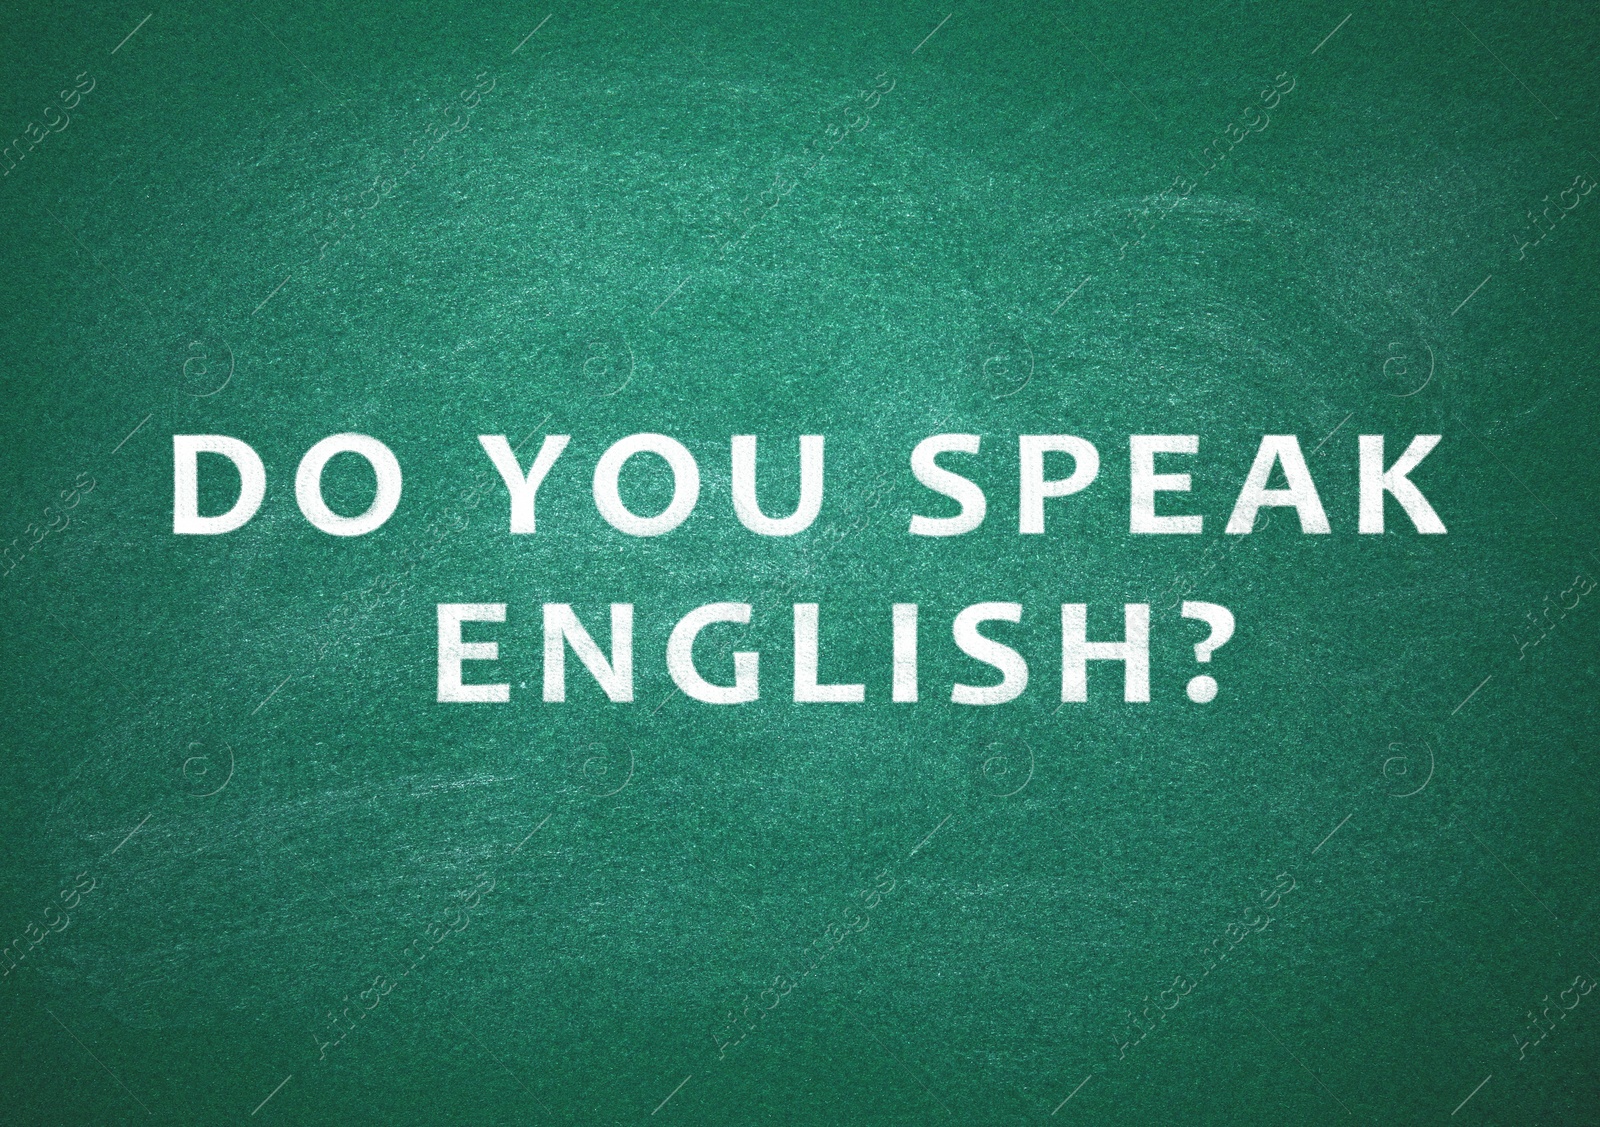 Image of Green chalkboard with text Do You Speak English 